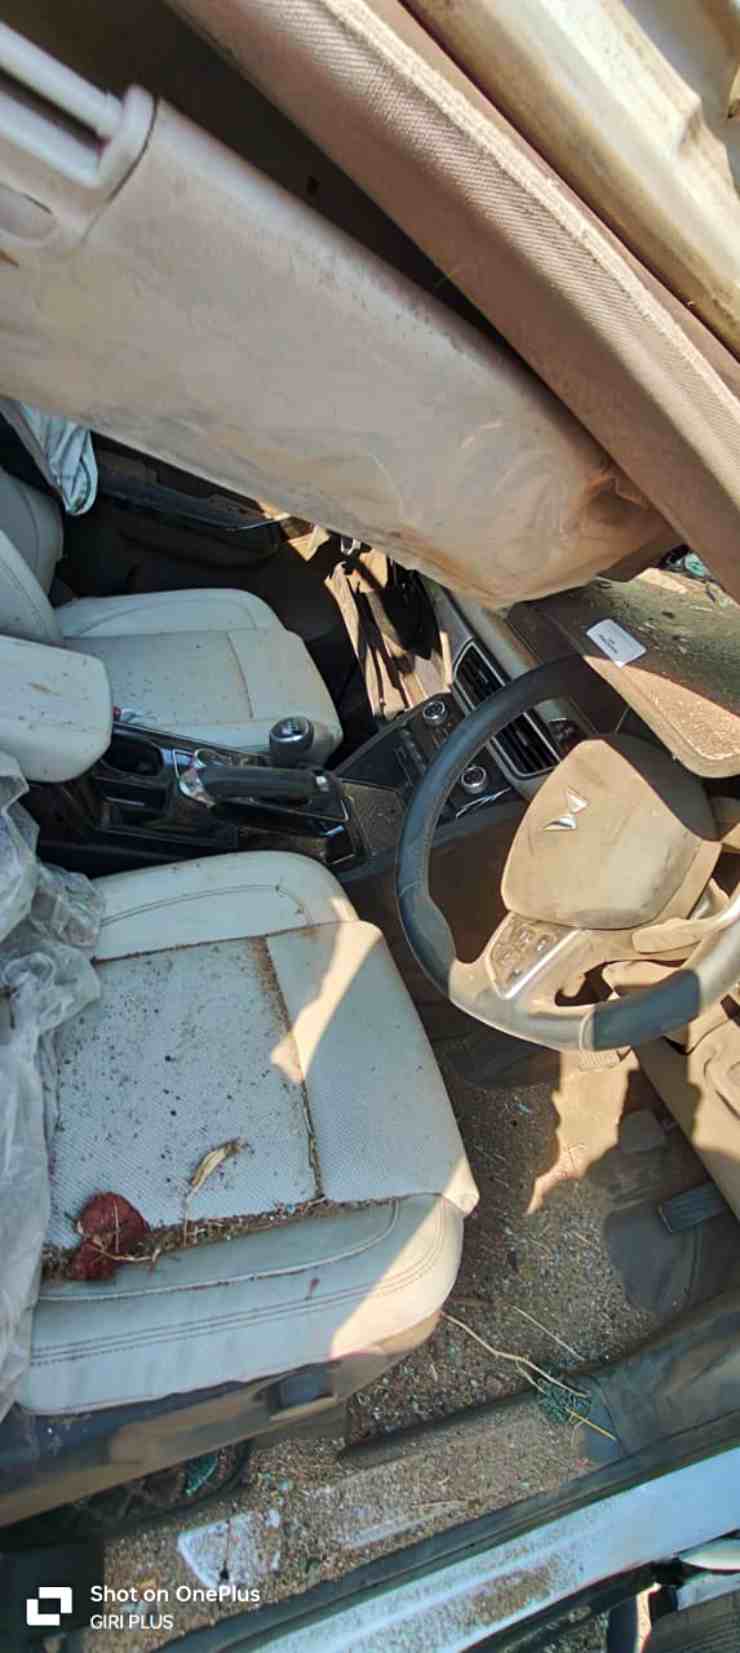 The Mahindra XUV700's front airbags did not deploy when it rolled over